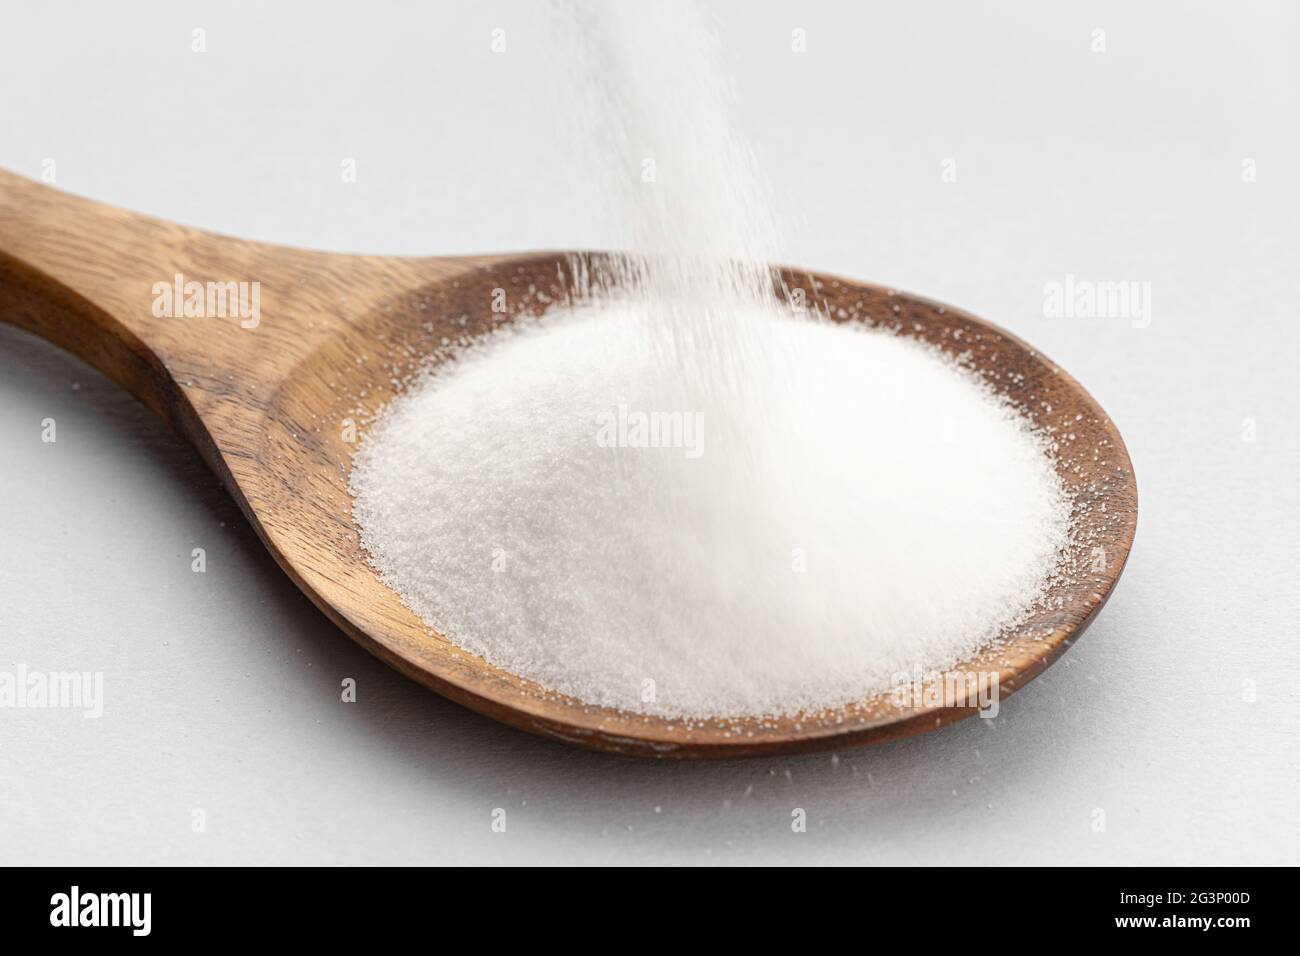 Collagen powder falling into a Wooden Spoon isolated on gray background. Close up Stock Photo